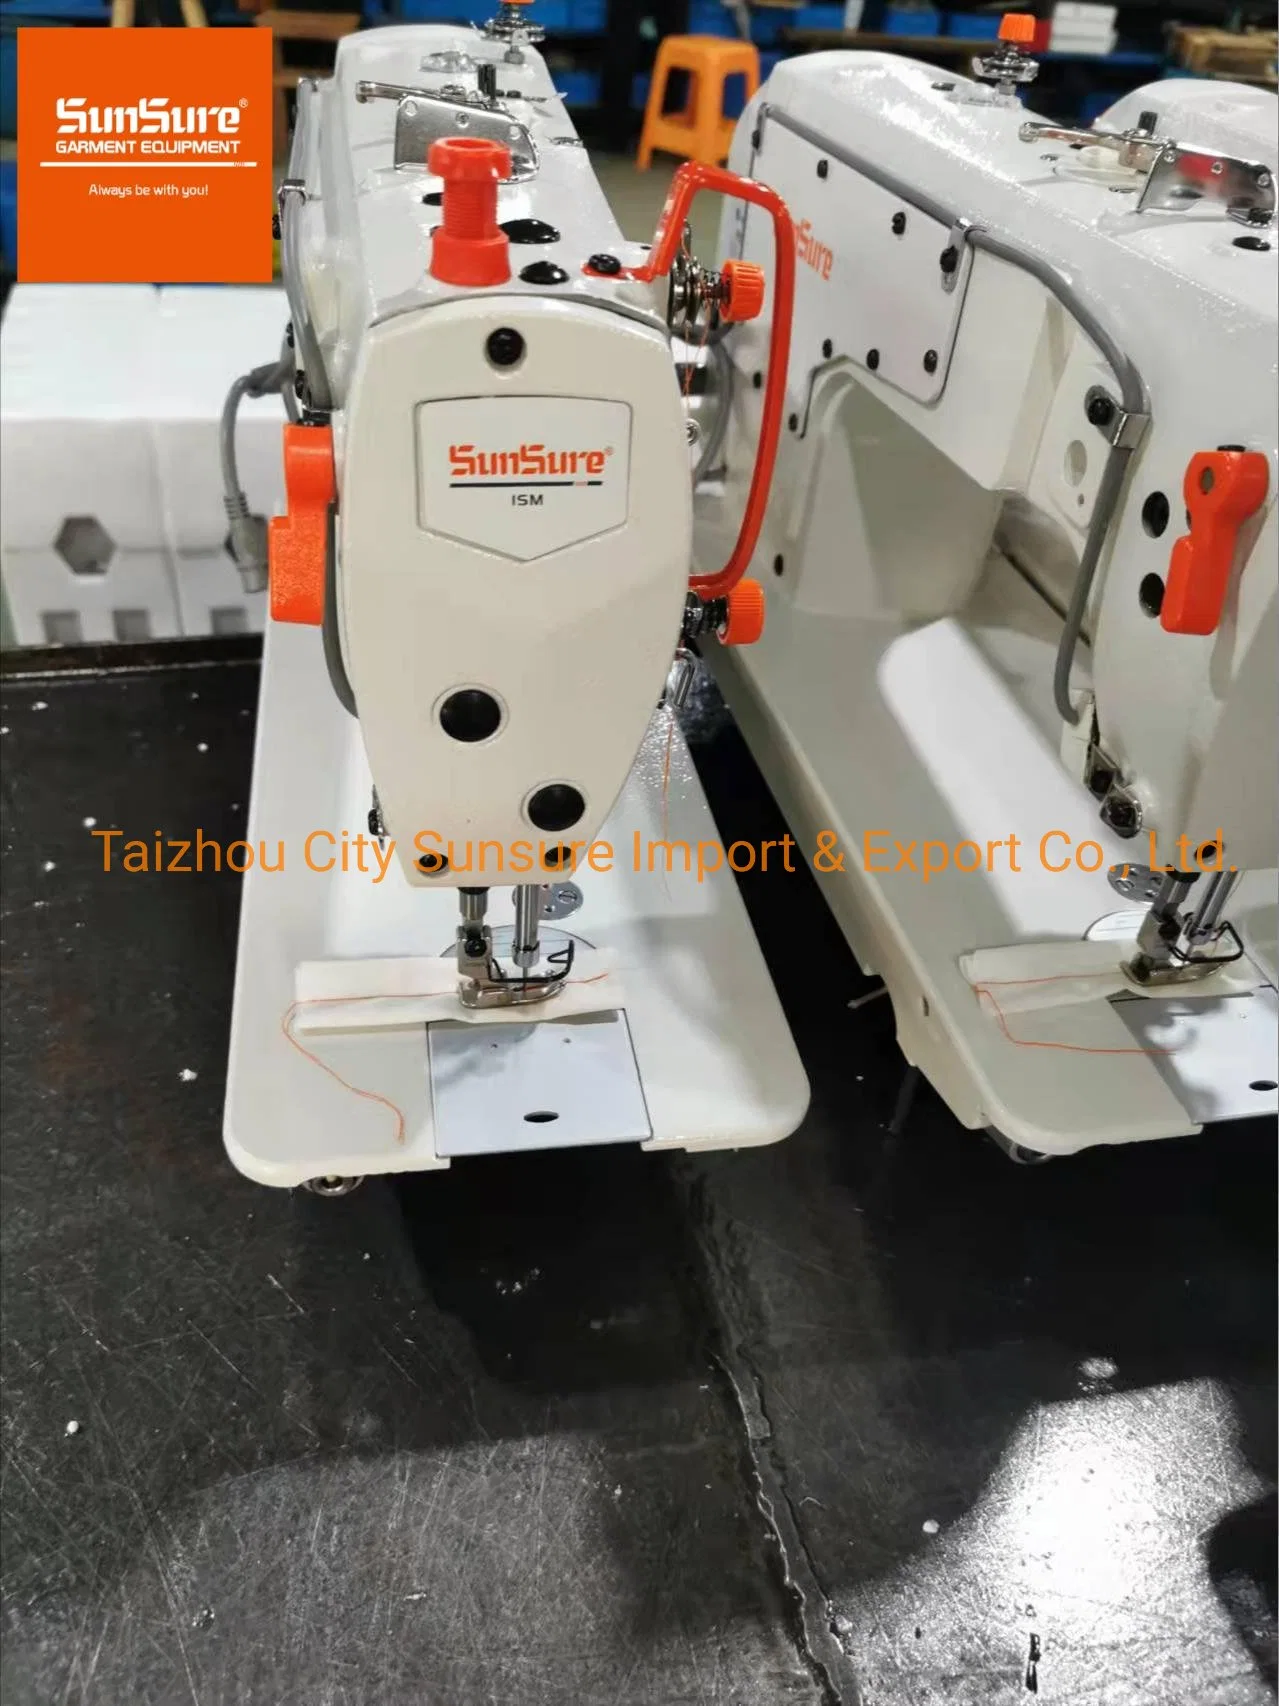 Discount Promotion Directly Drive High Speed Intergrated Lockstitch Sewing Machine for Garments Ss-8700d